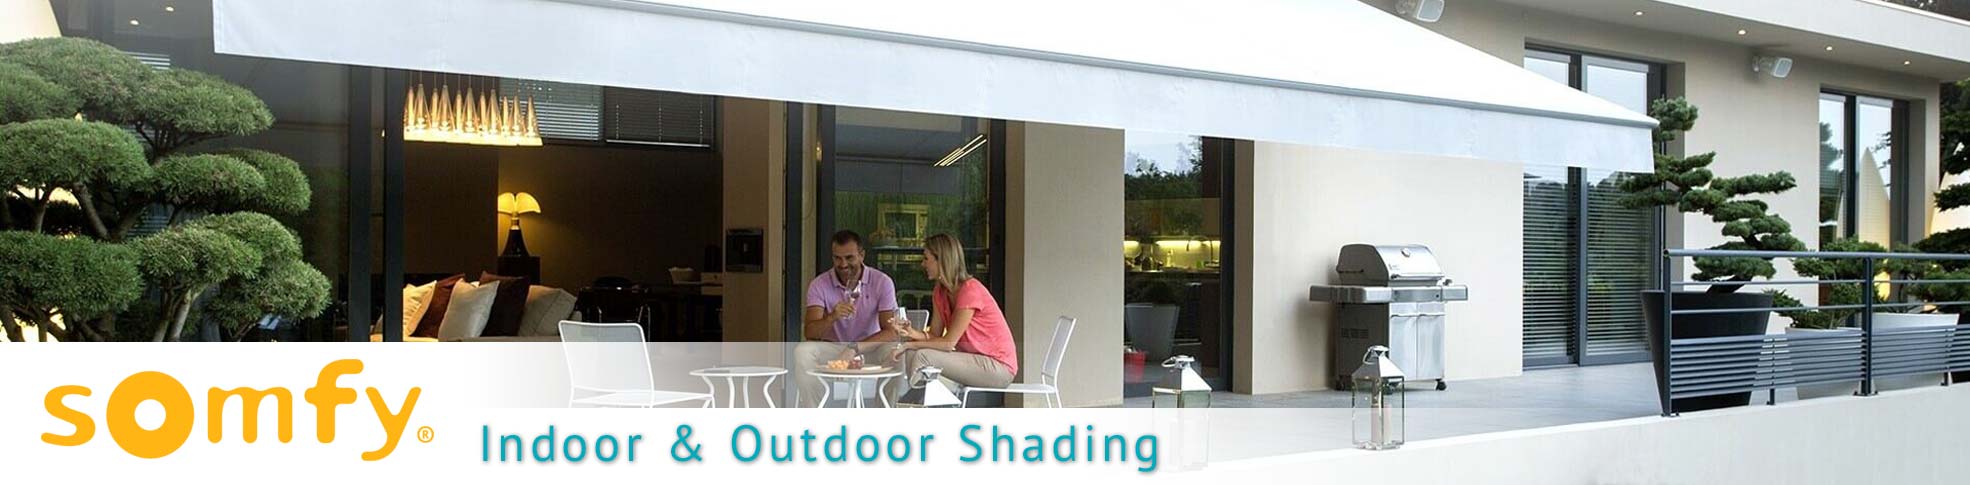 Somfy outdoor awnings installation for Orlando, Winter Park, Winderemere FloridaL